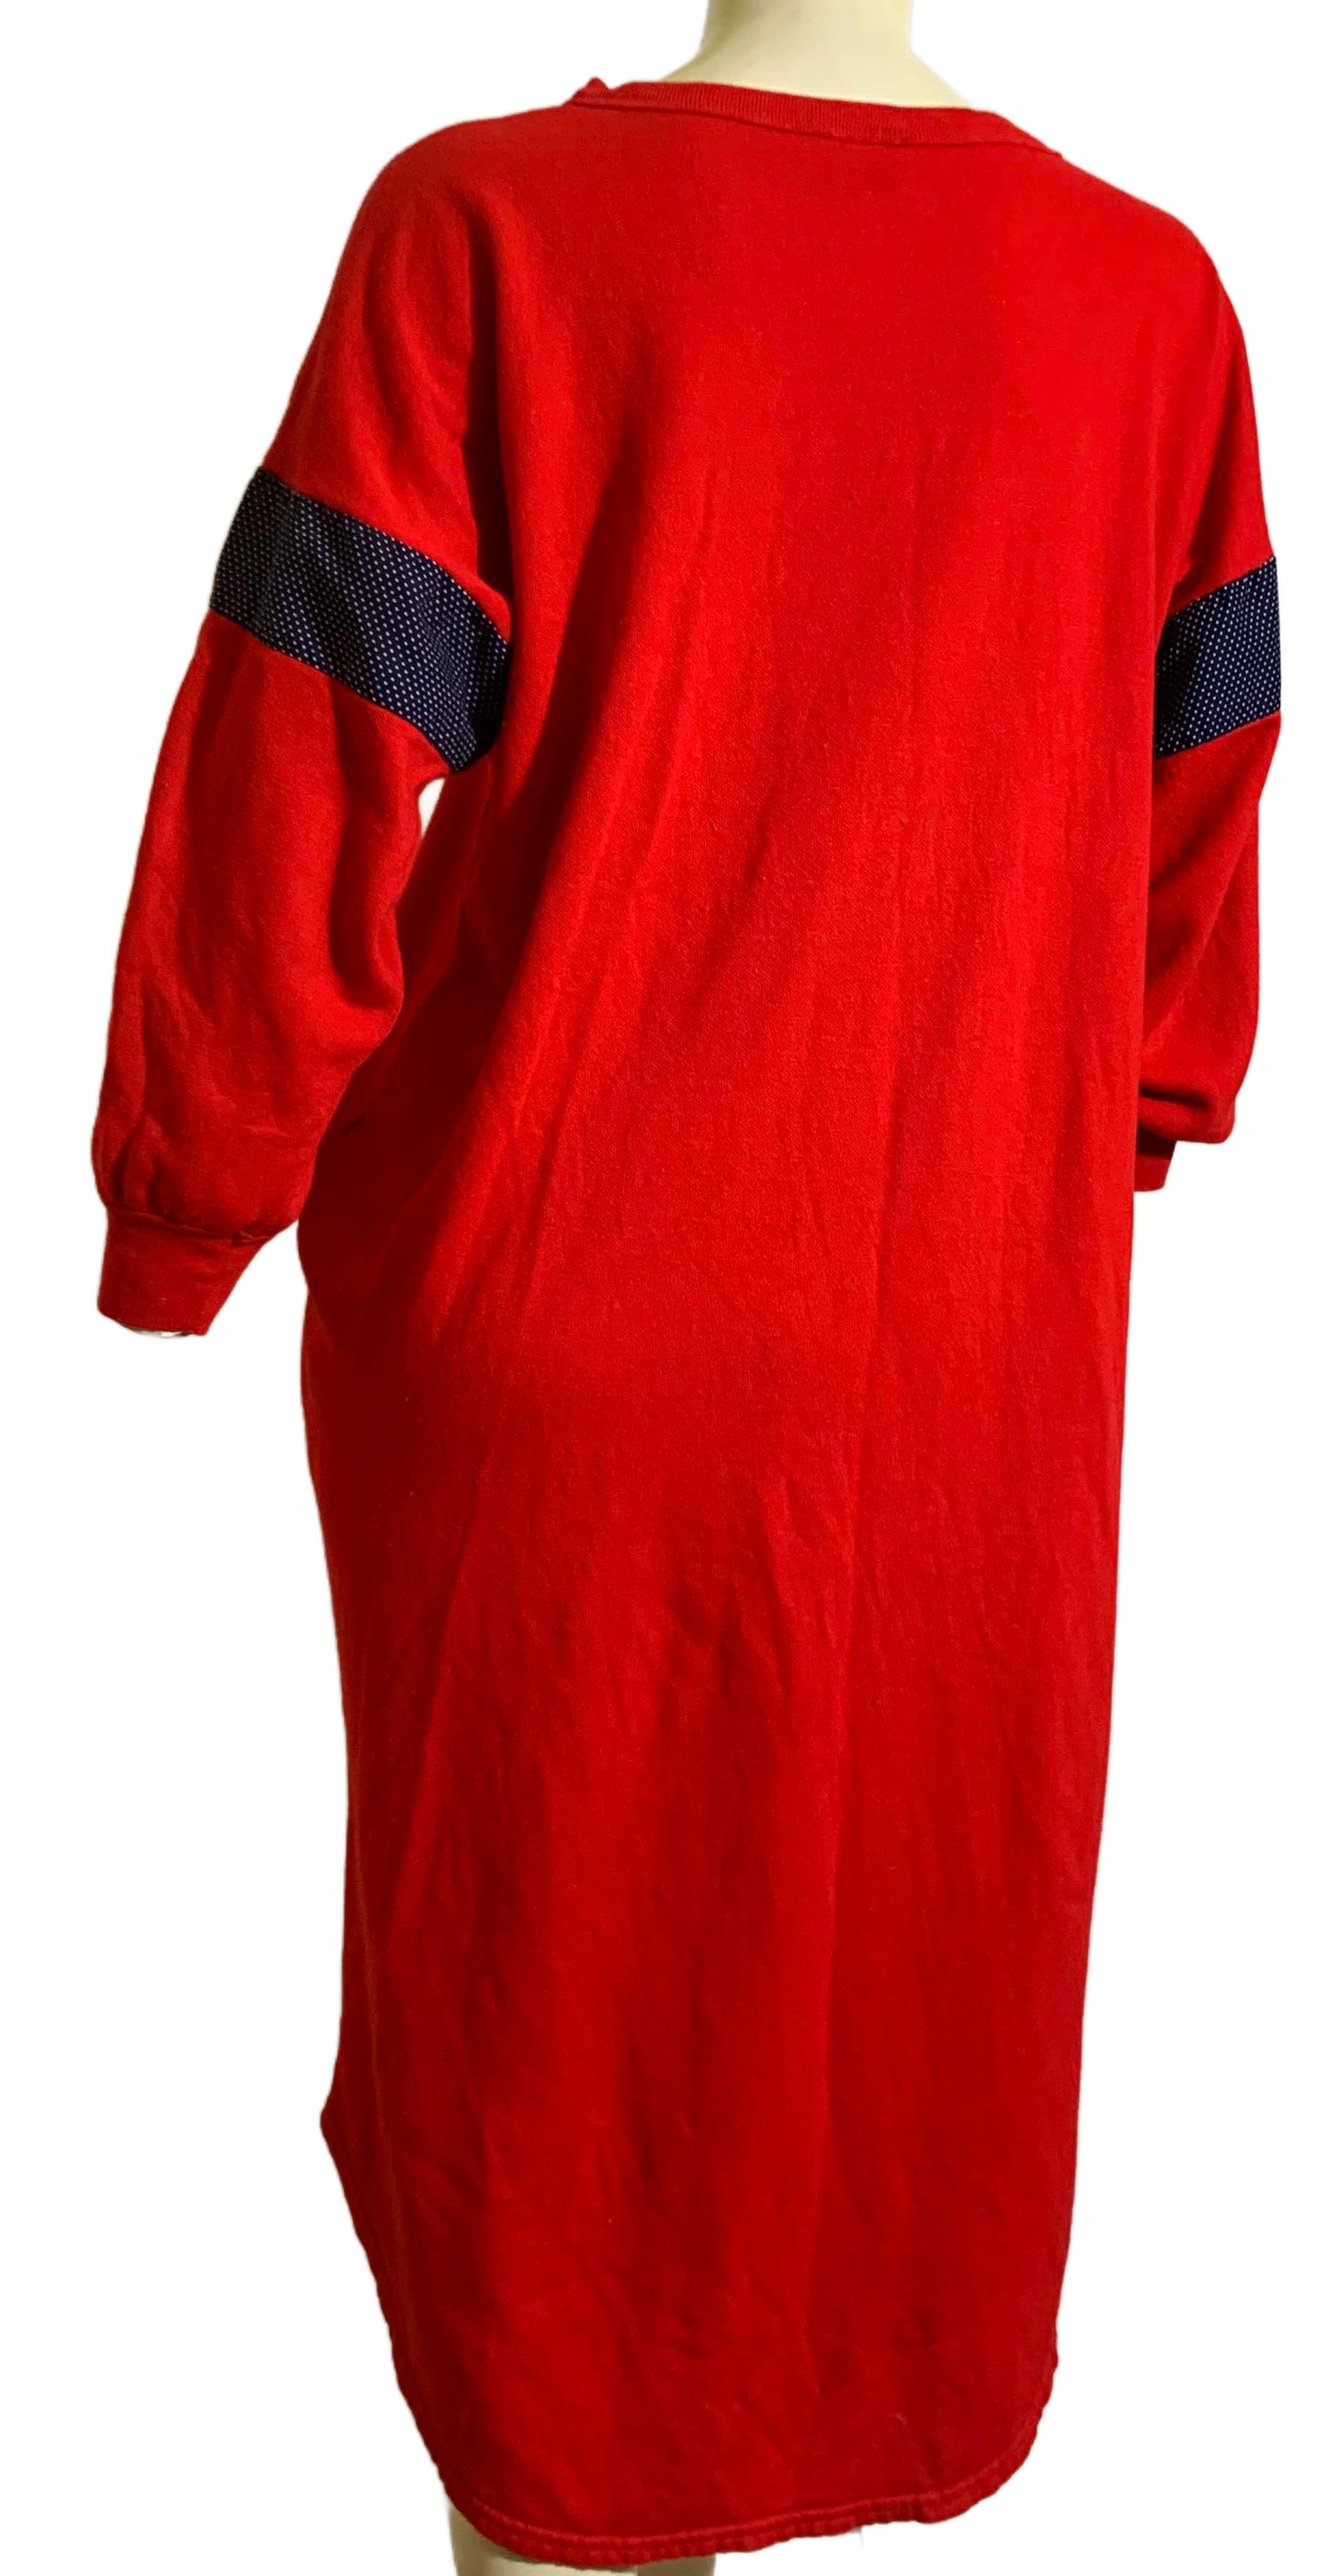 Shaggy Spotted Doggy Applique Red Sweatshirt Nightgown circa 1980s